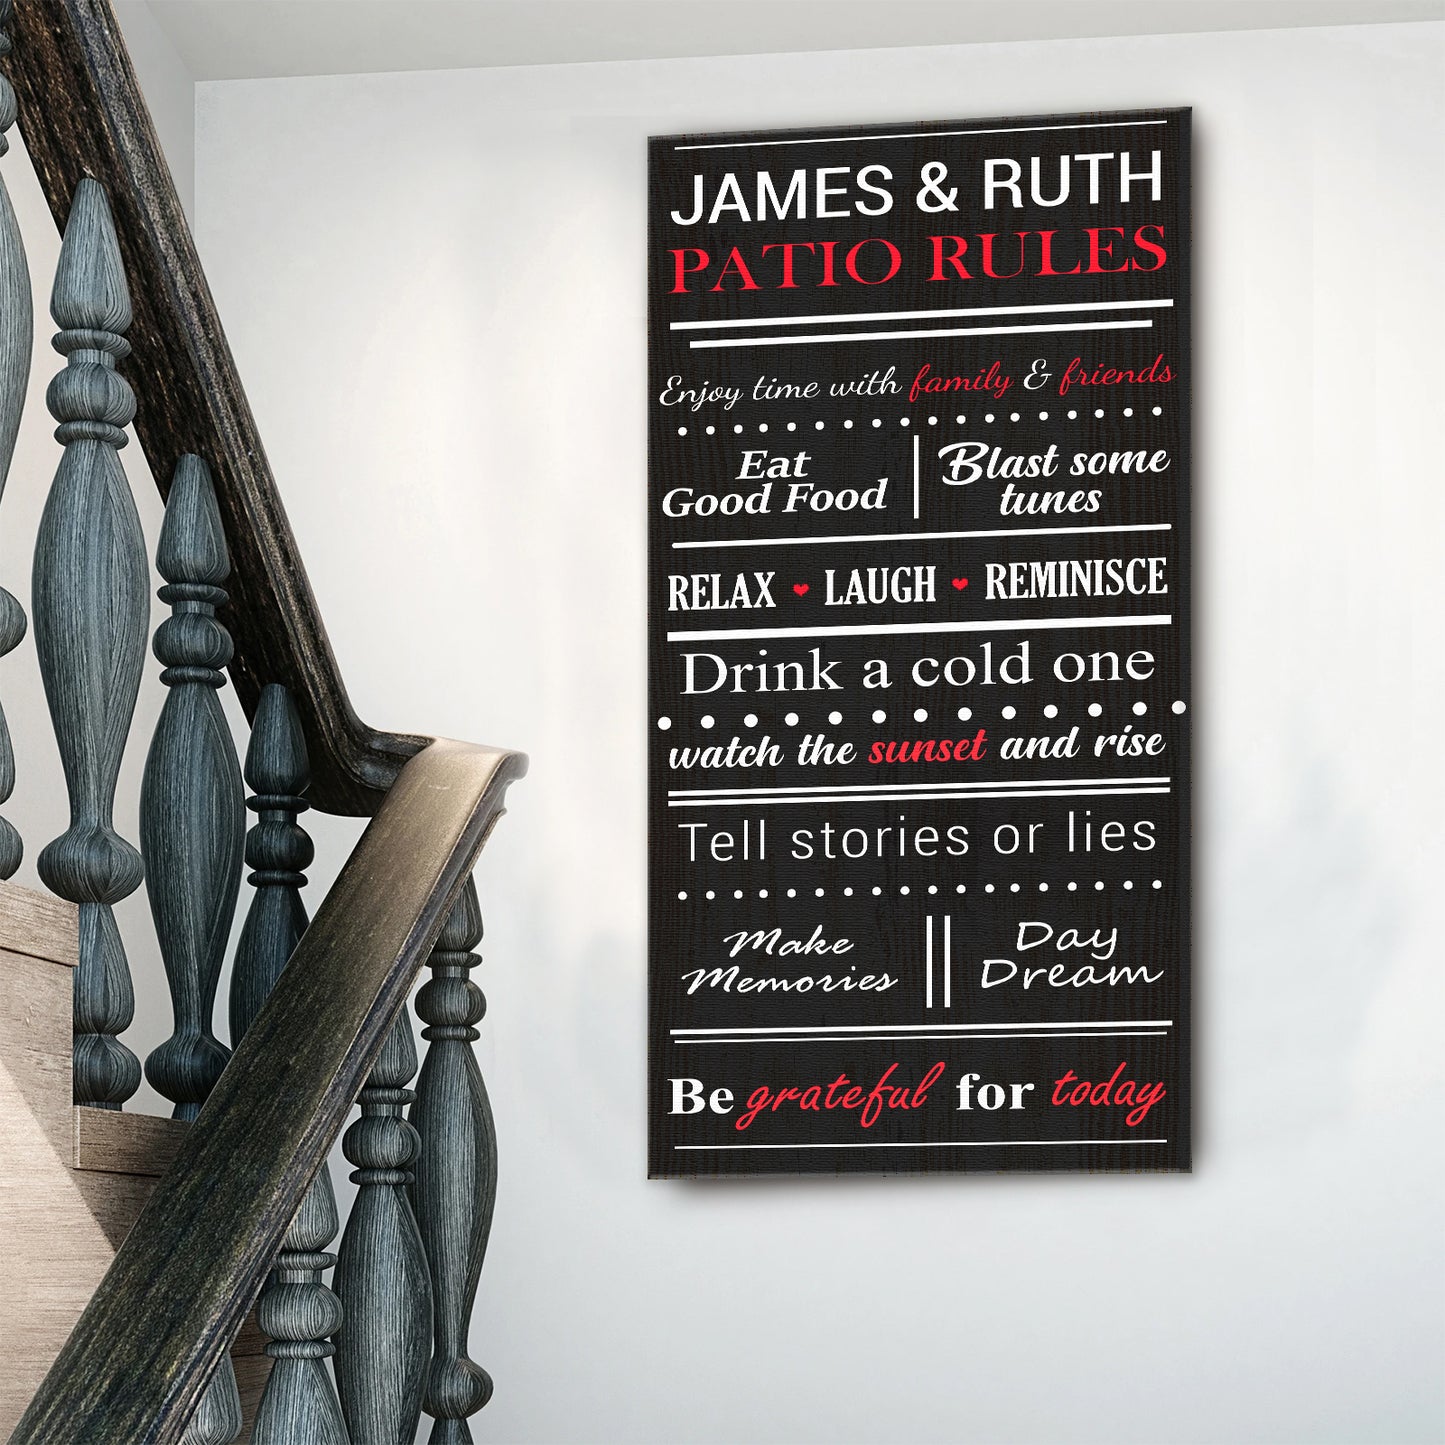 Patio Rules Sign - Image by Tailored Canvases